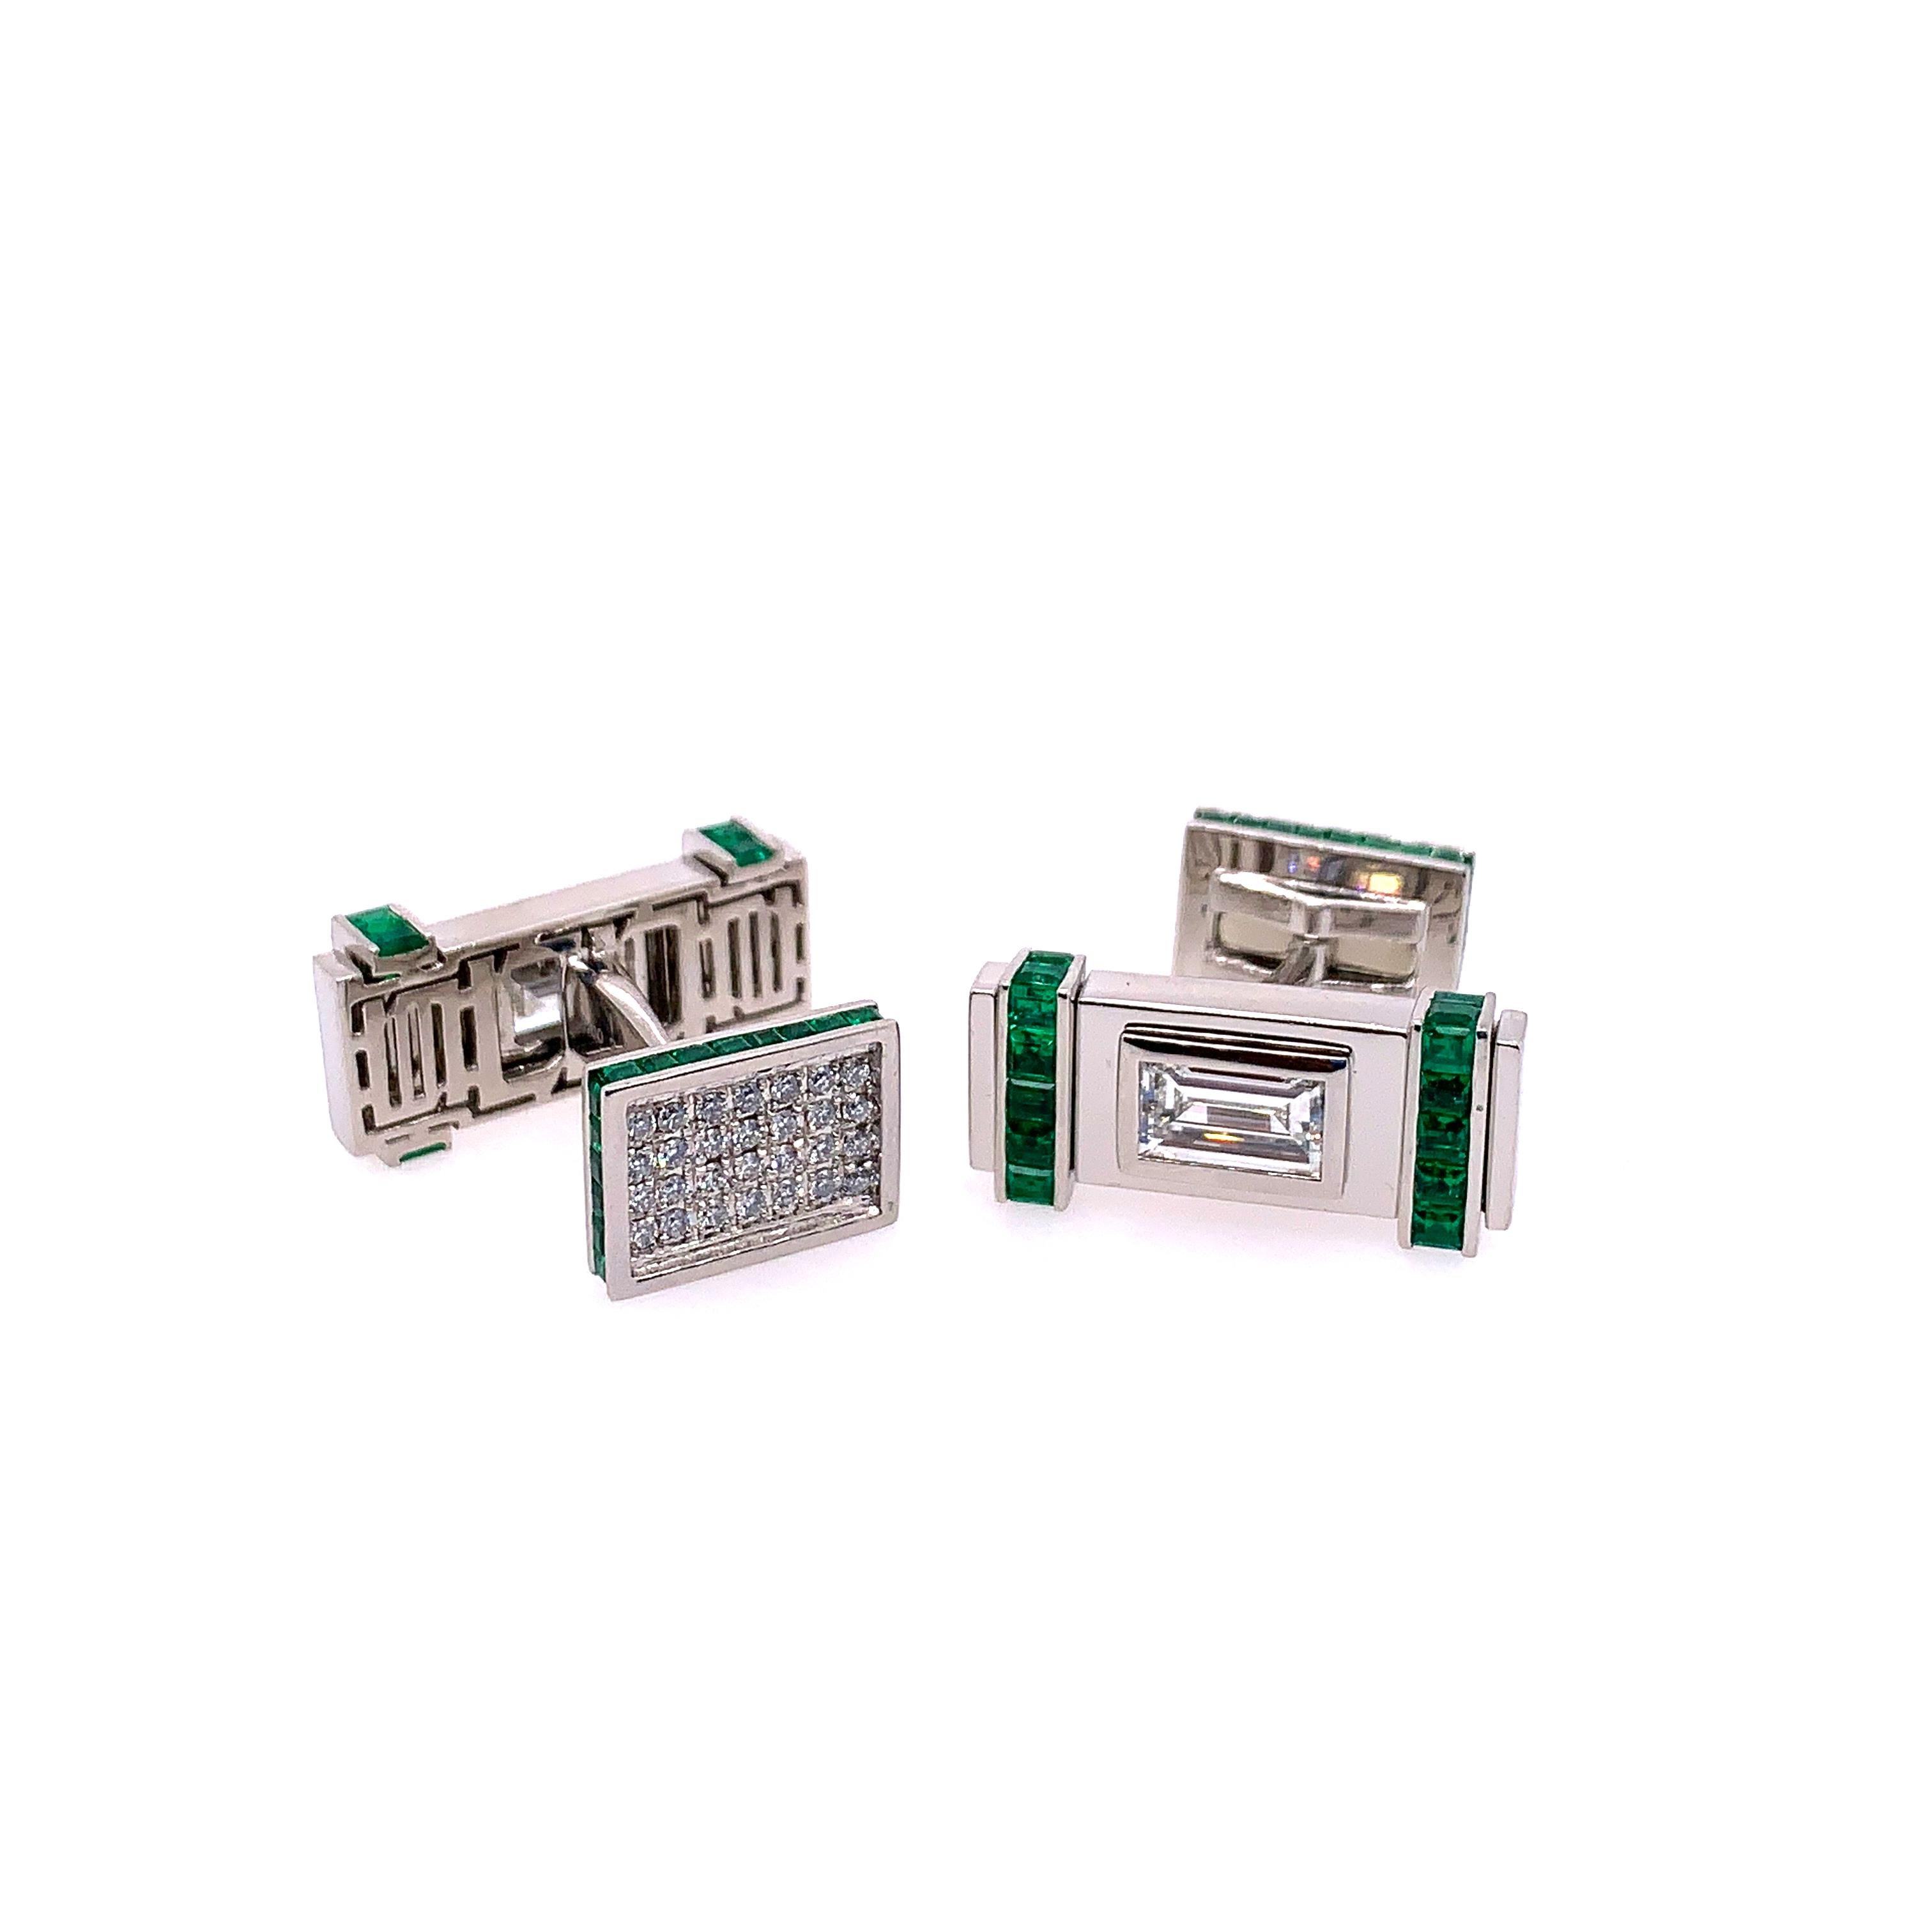 These cufflinks feature two Baguette cut diamonds, one weighing 1.11  and the other weighing 1.08 carats. (GIA Certified)

These beautiful diamonds are mounted with Carre-cut Emeralds totaling 2.60 carats and collection pavé diamonds weighing .30